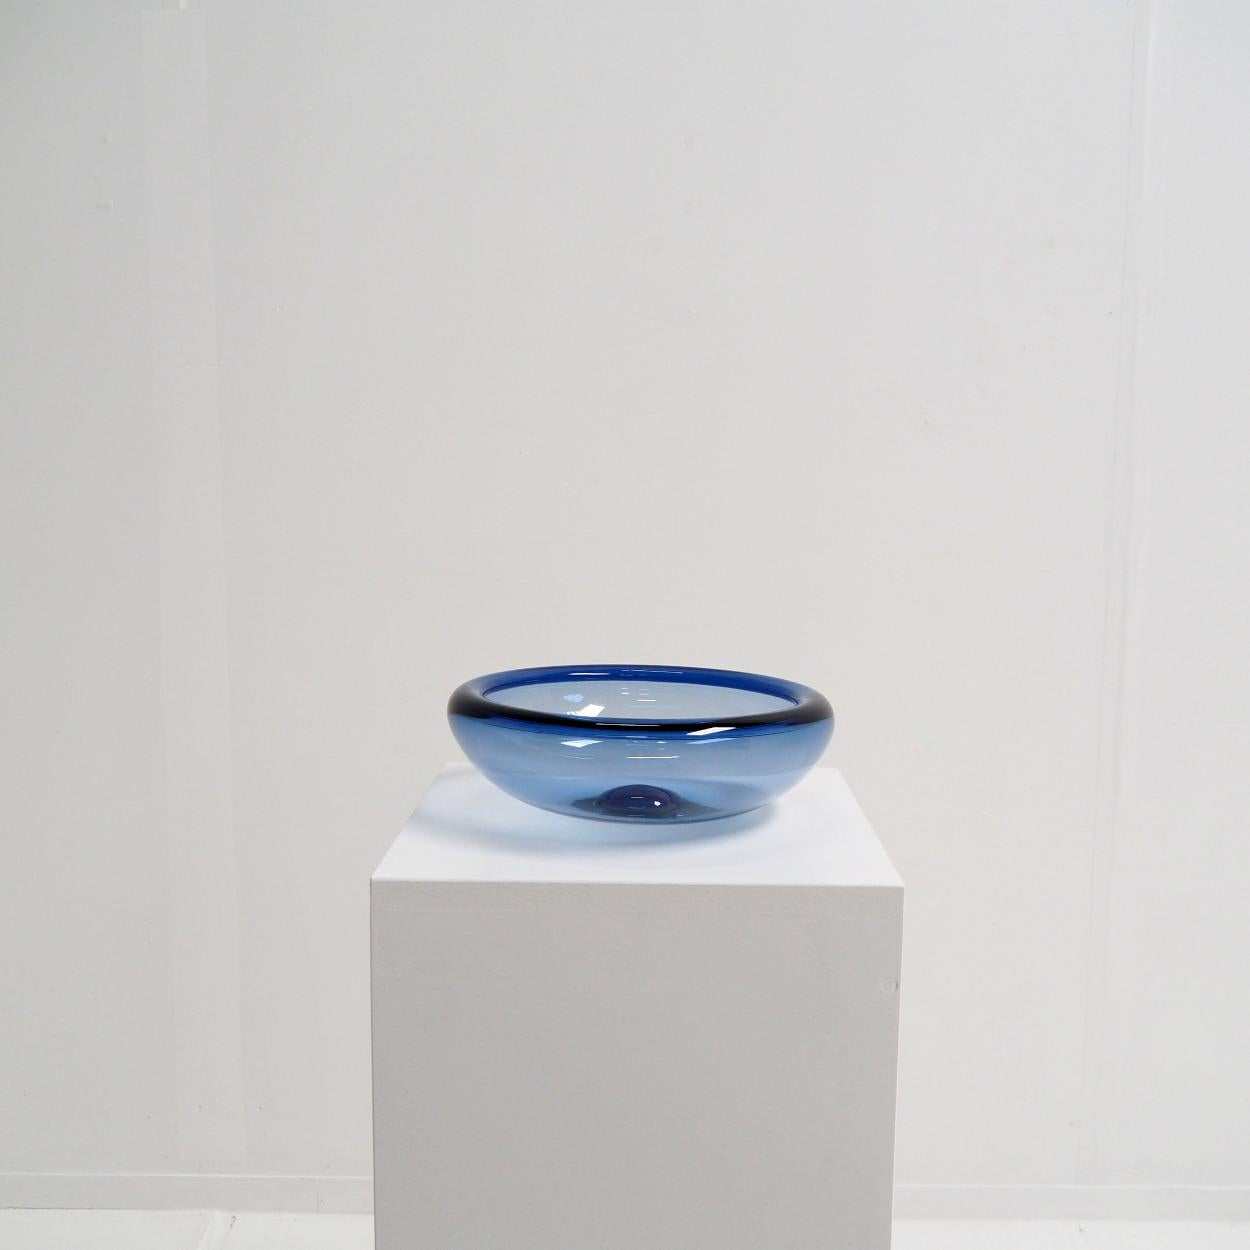 Beautiful blue glass bowl designed by the Danish glassmaker Per Lütken (1916-1998). He designed this bowl for the famous Holmegaard Glass Factory in the 1950s. Per Lütken was one of the most important Danish glassmakers ever and has left a strong